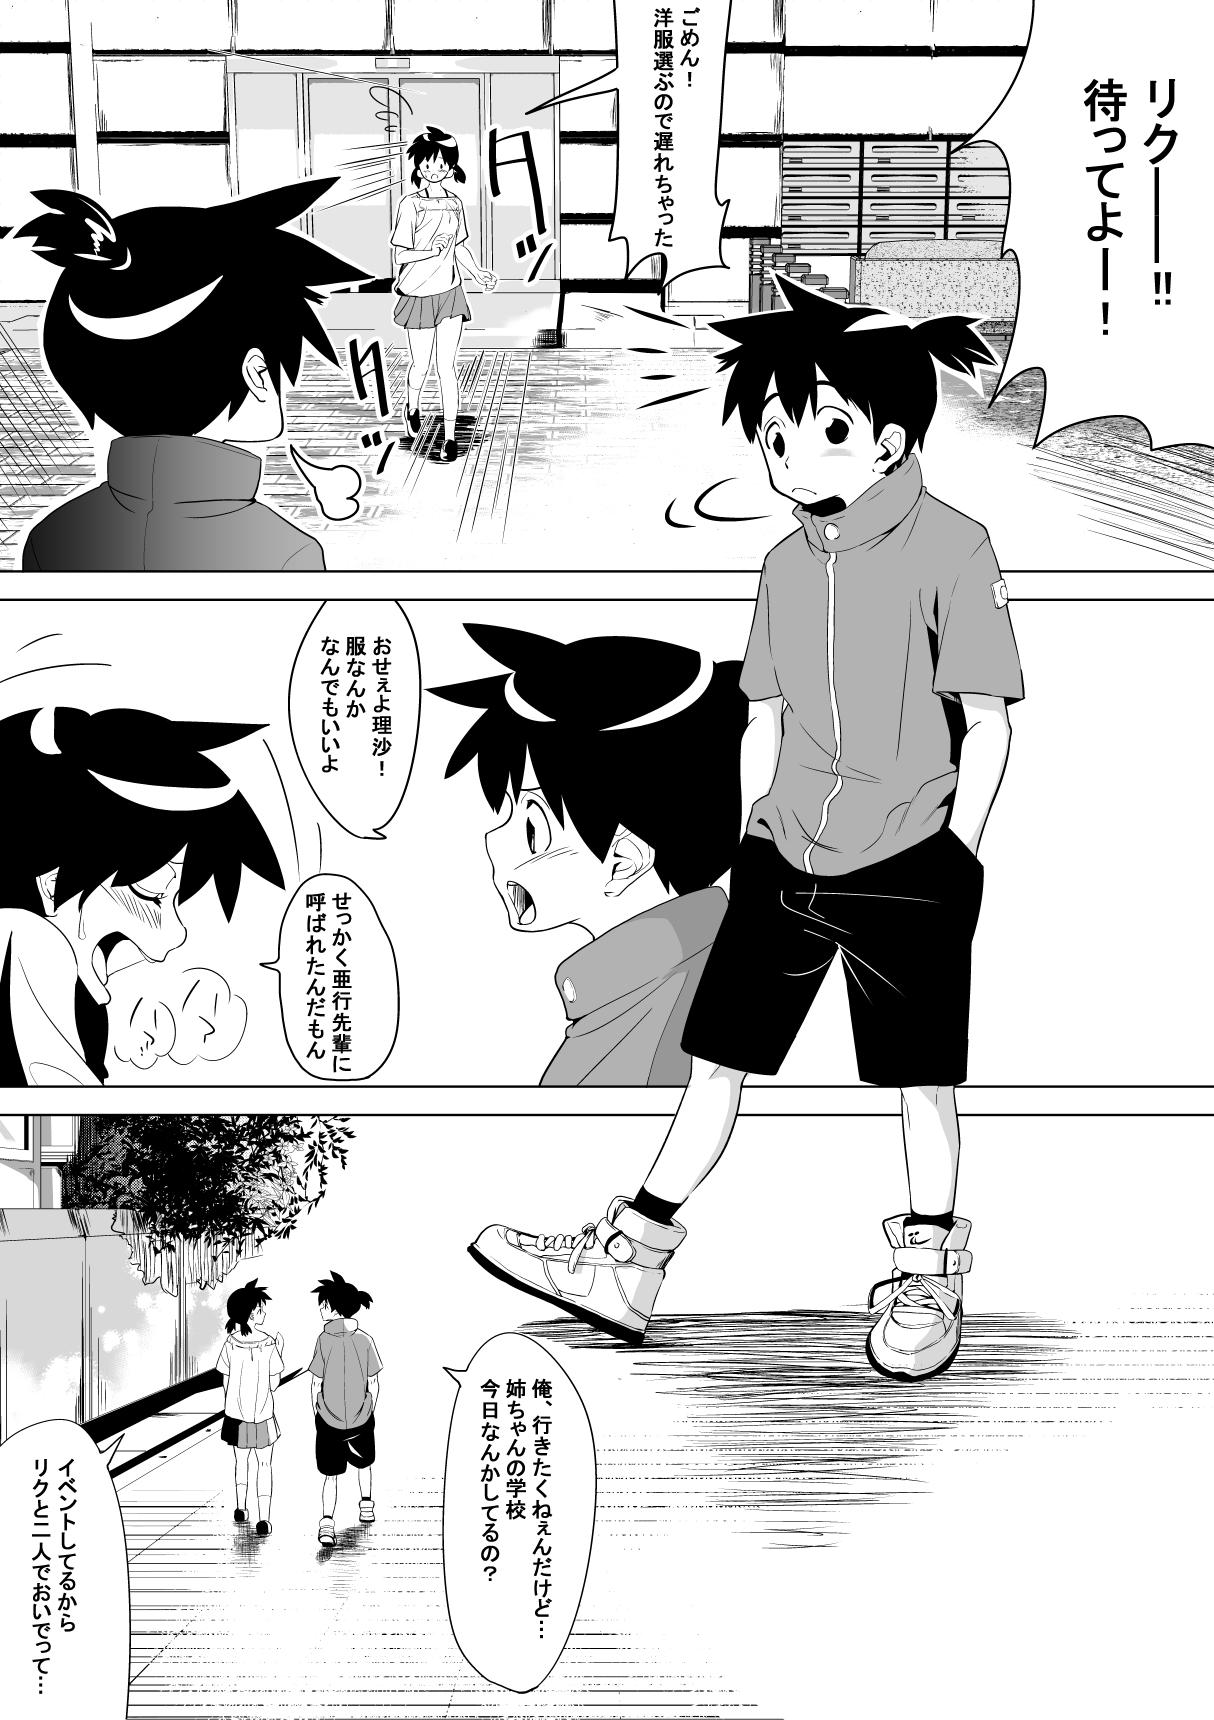 Adult こんな国は嫌だ Tranny - Page 6